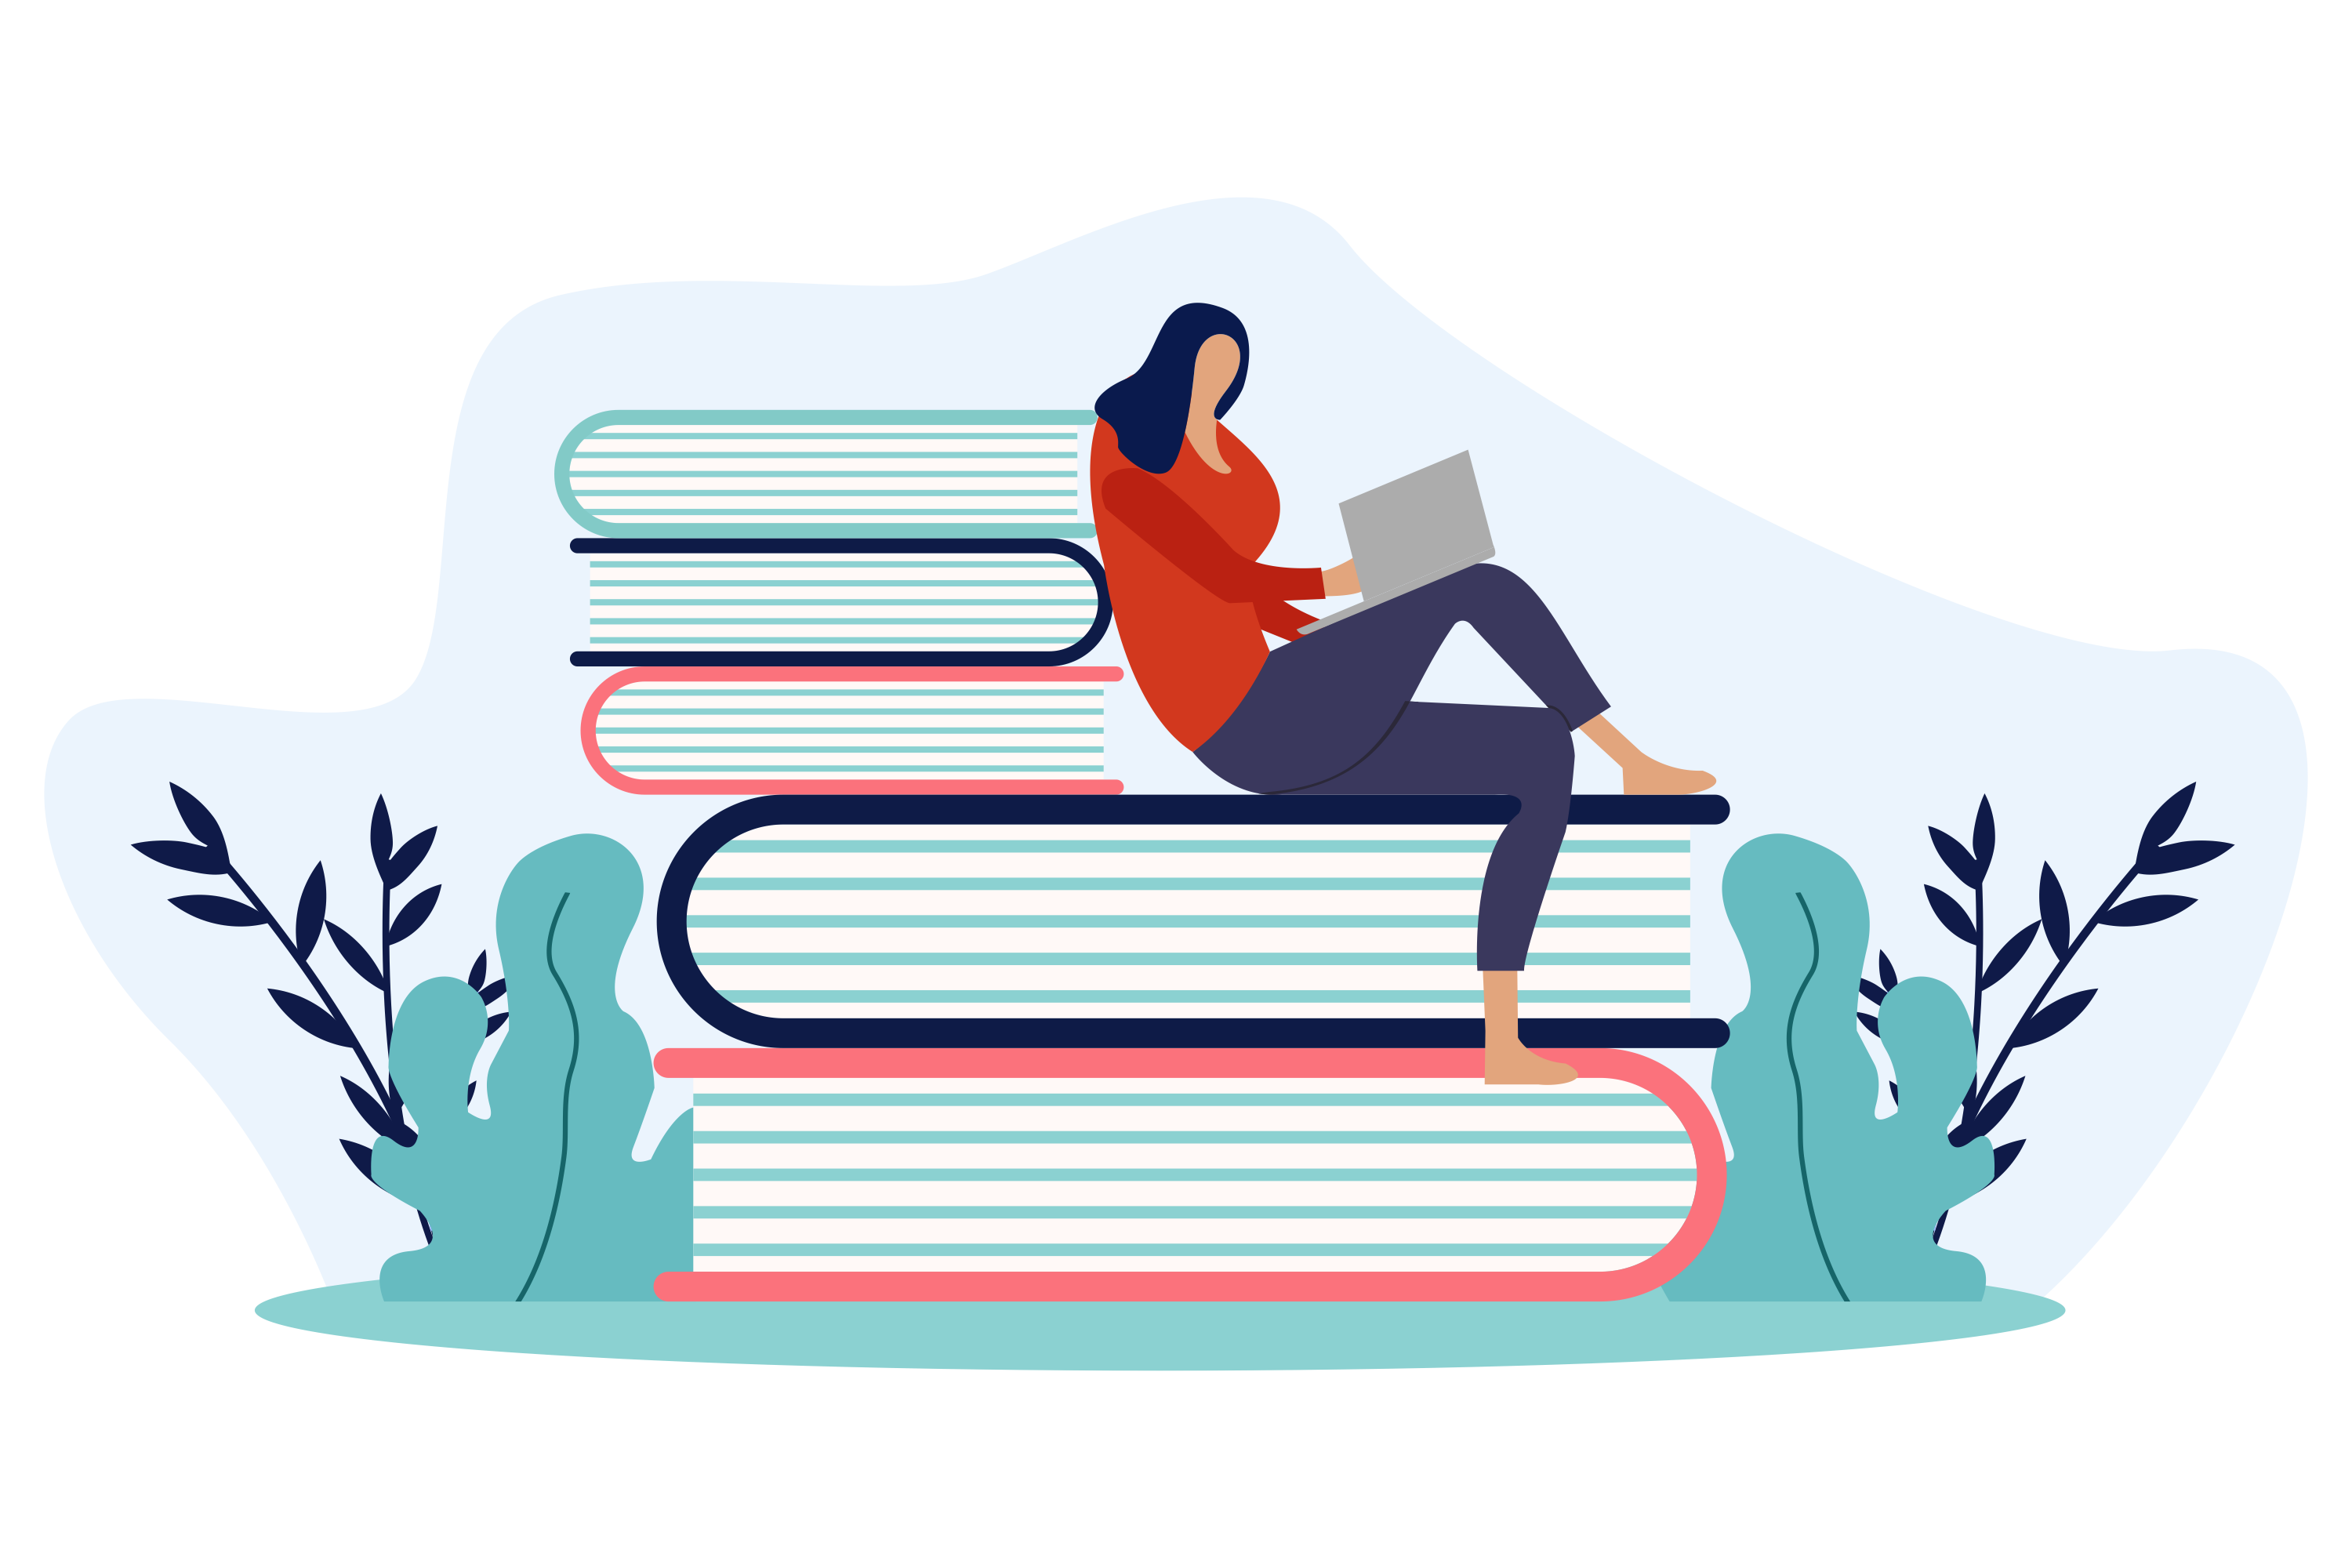 people-interested-hobby-sit-education-information-icon-book-person-young-literature-learn-home-illustration